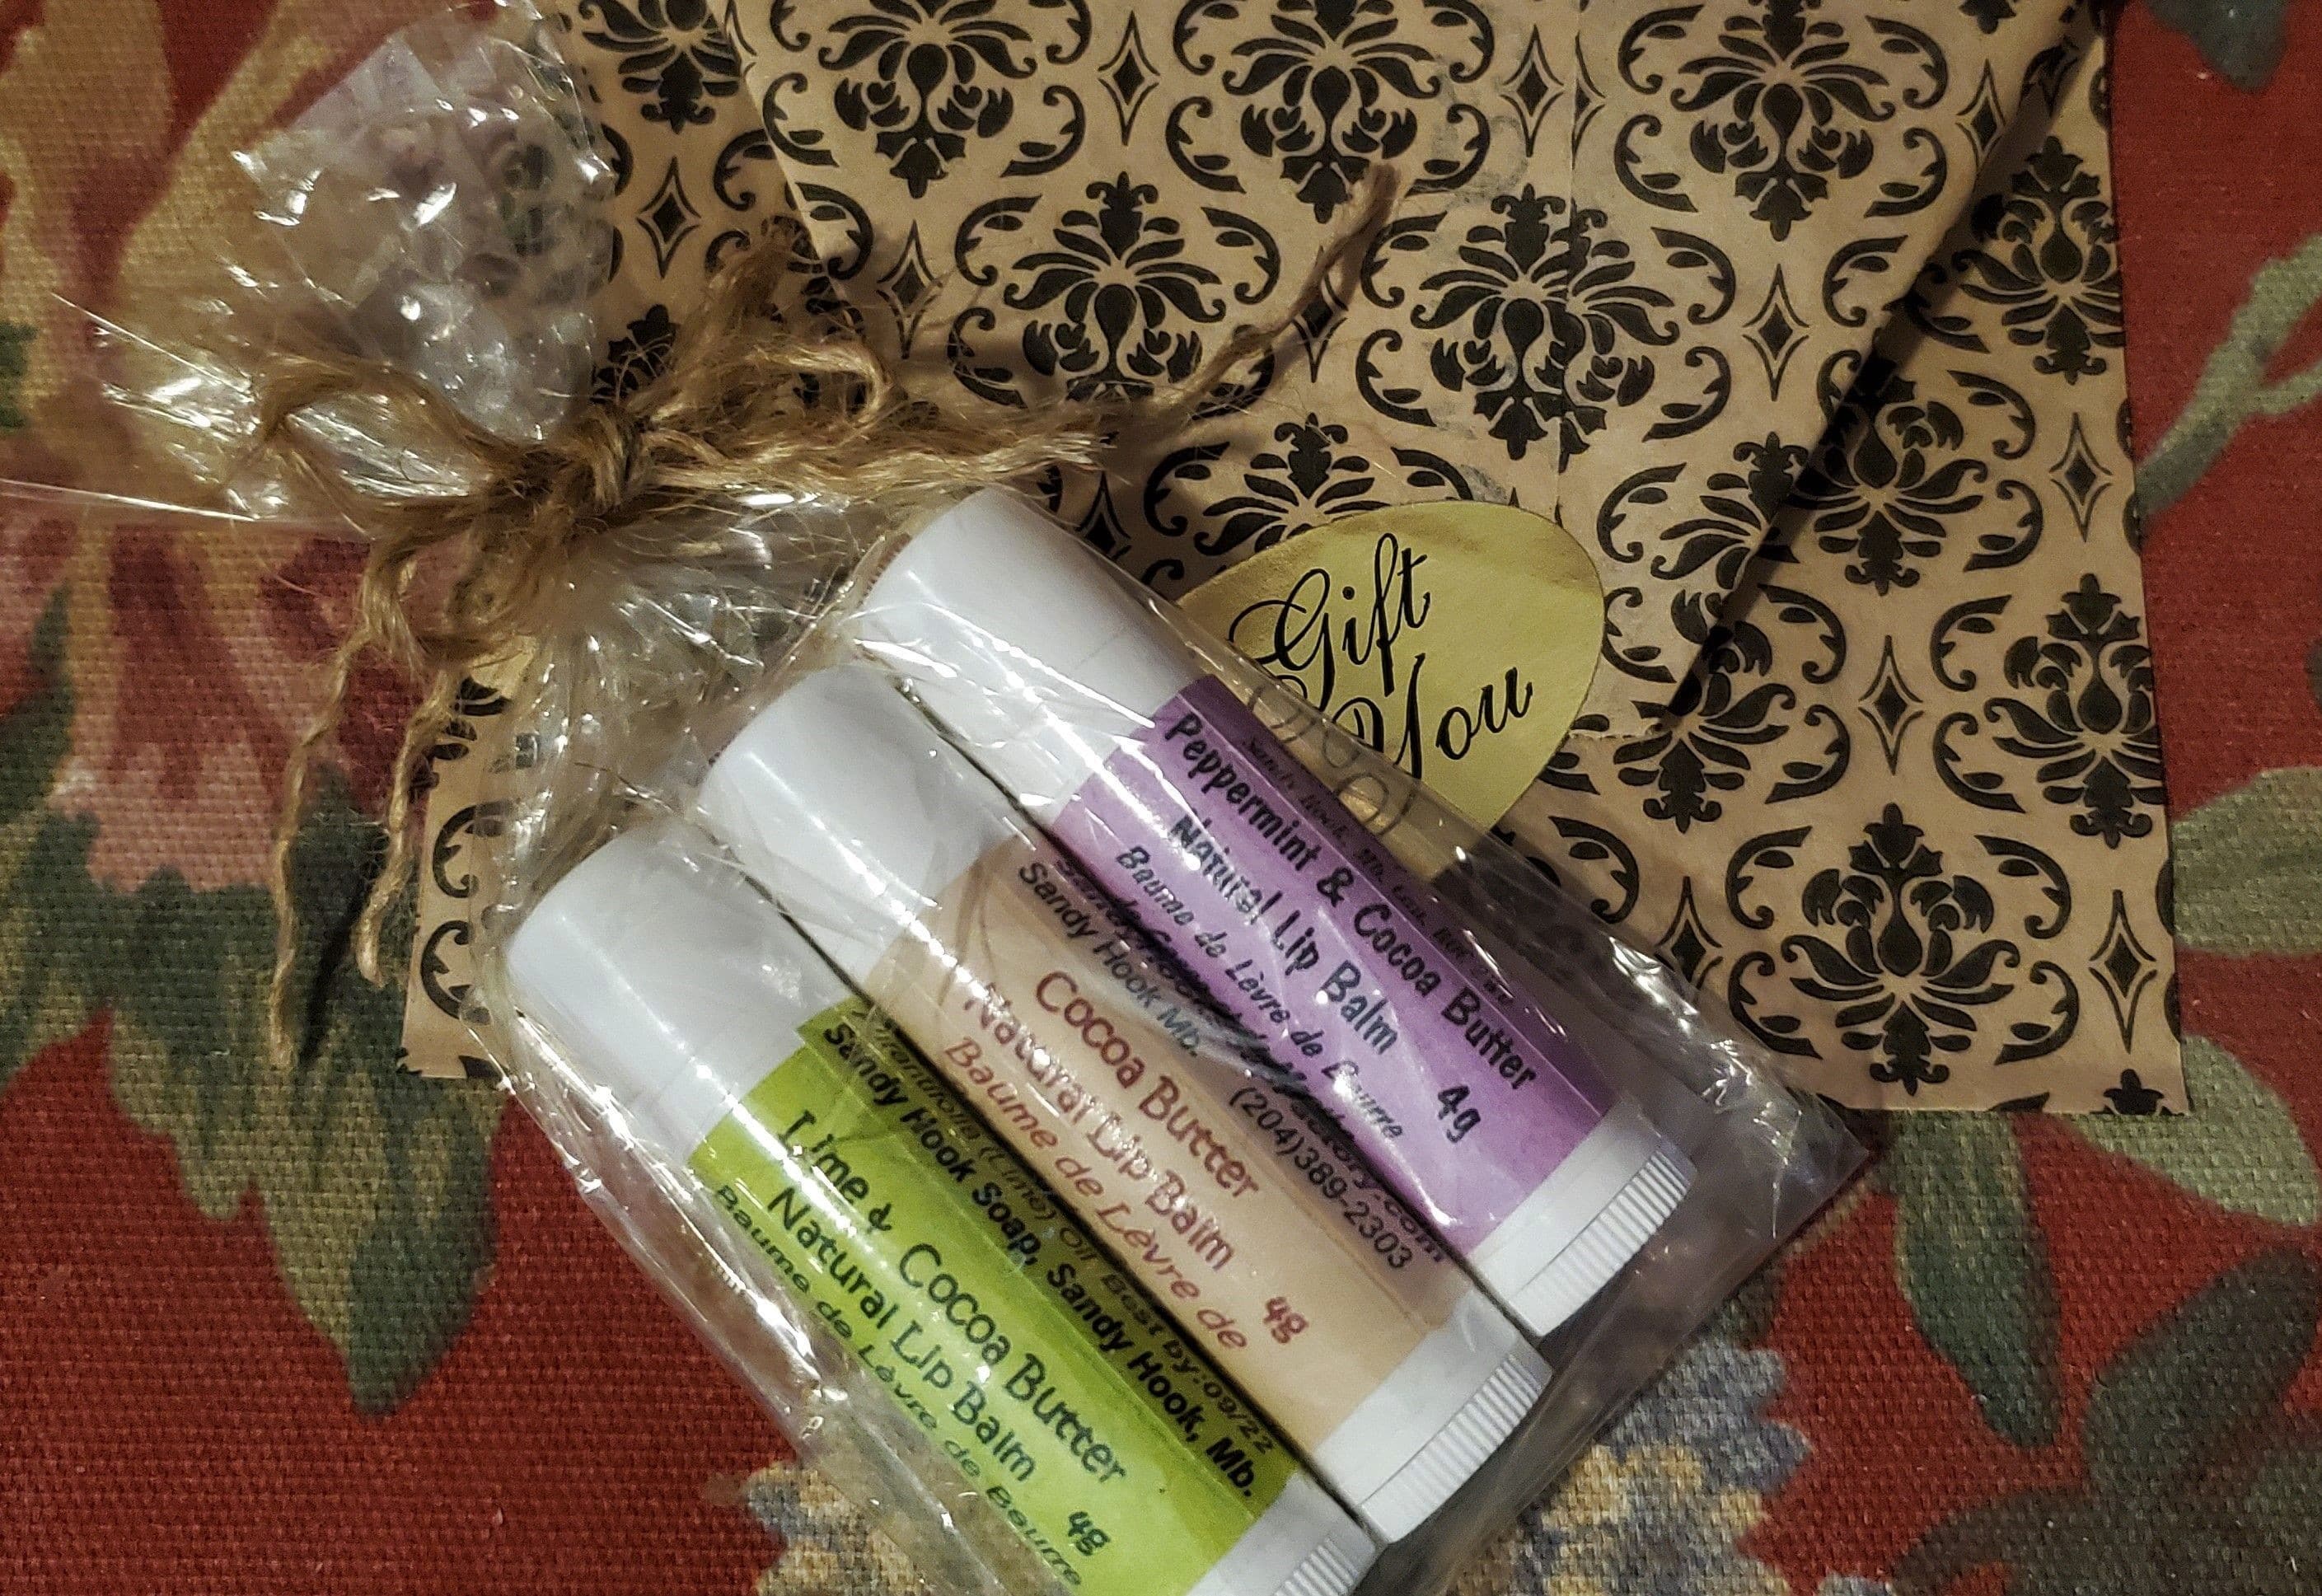 Awesome ingredients make awesome lip balms!  All natural emollient rich organic oils moisturize and protect lips; packaged in BPA free tubes. Made in Canada.